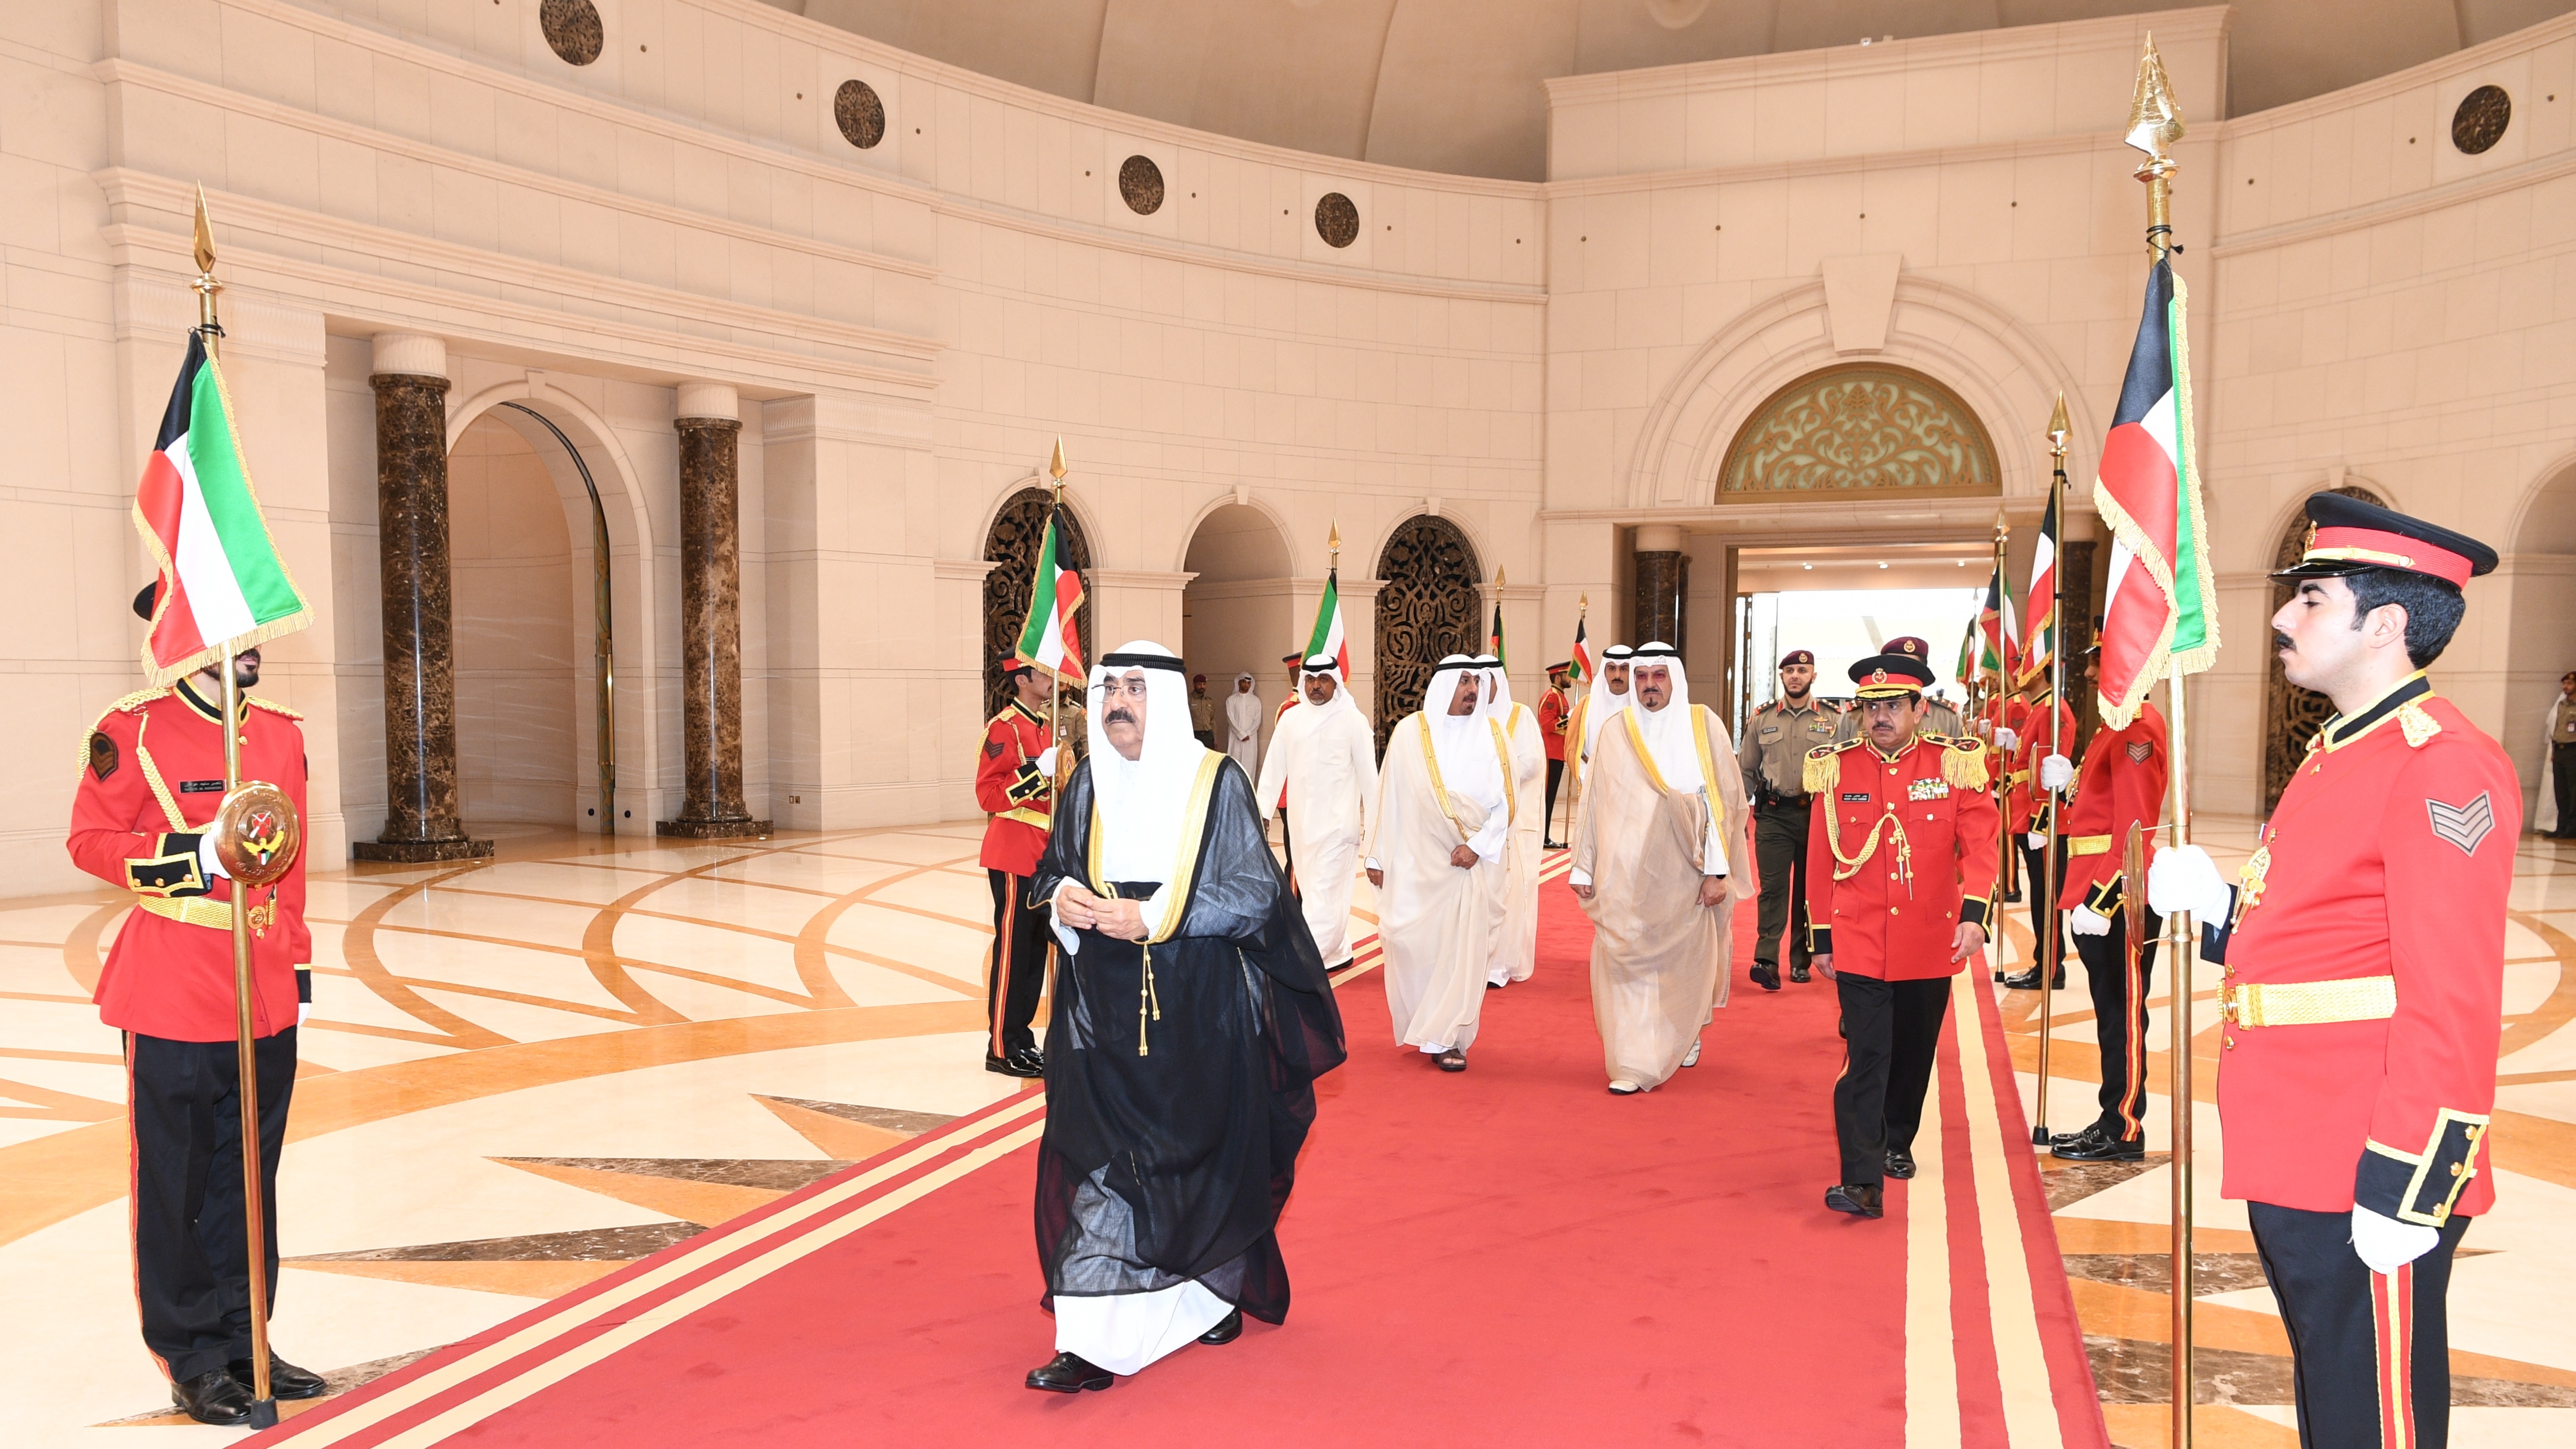 His Highness the Amir heading to Turkiye on an official state visit